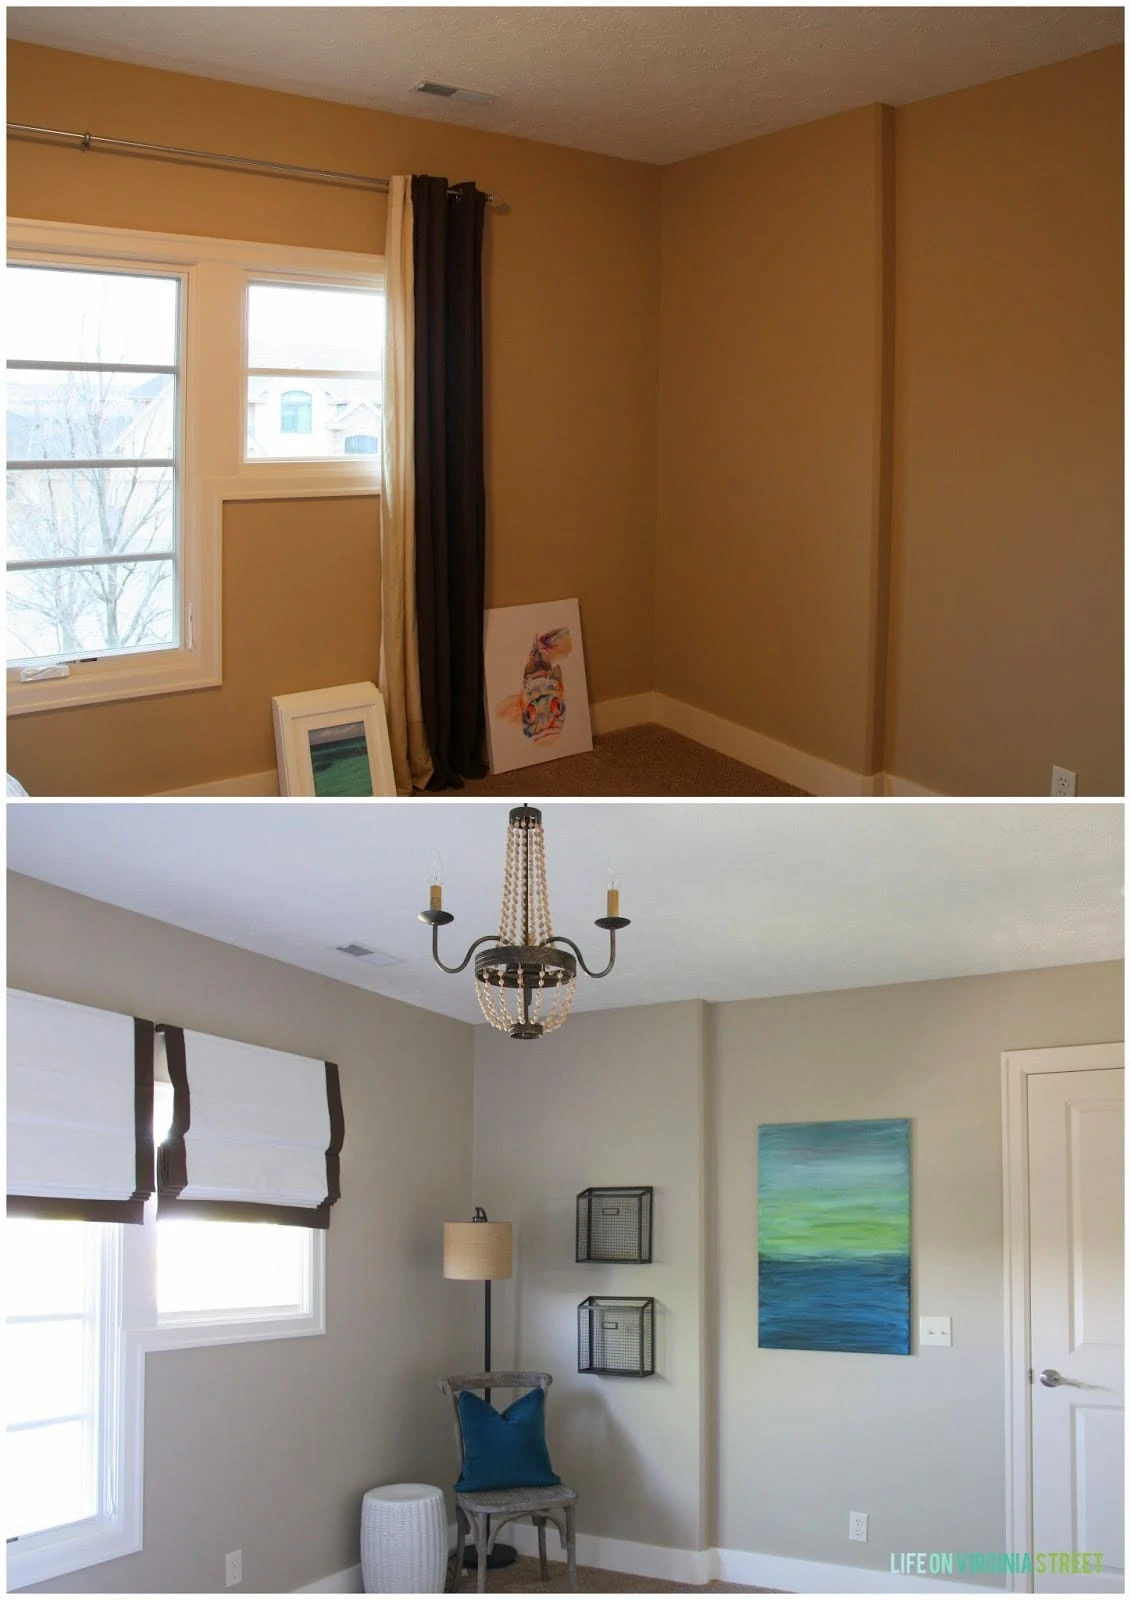 What a difference paint, lighting and window treatments make. Our guest room looks so much larger after the update. 